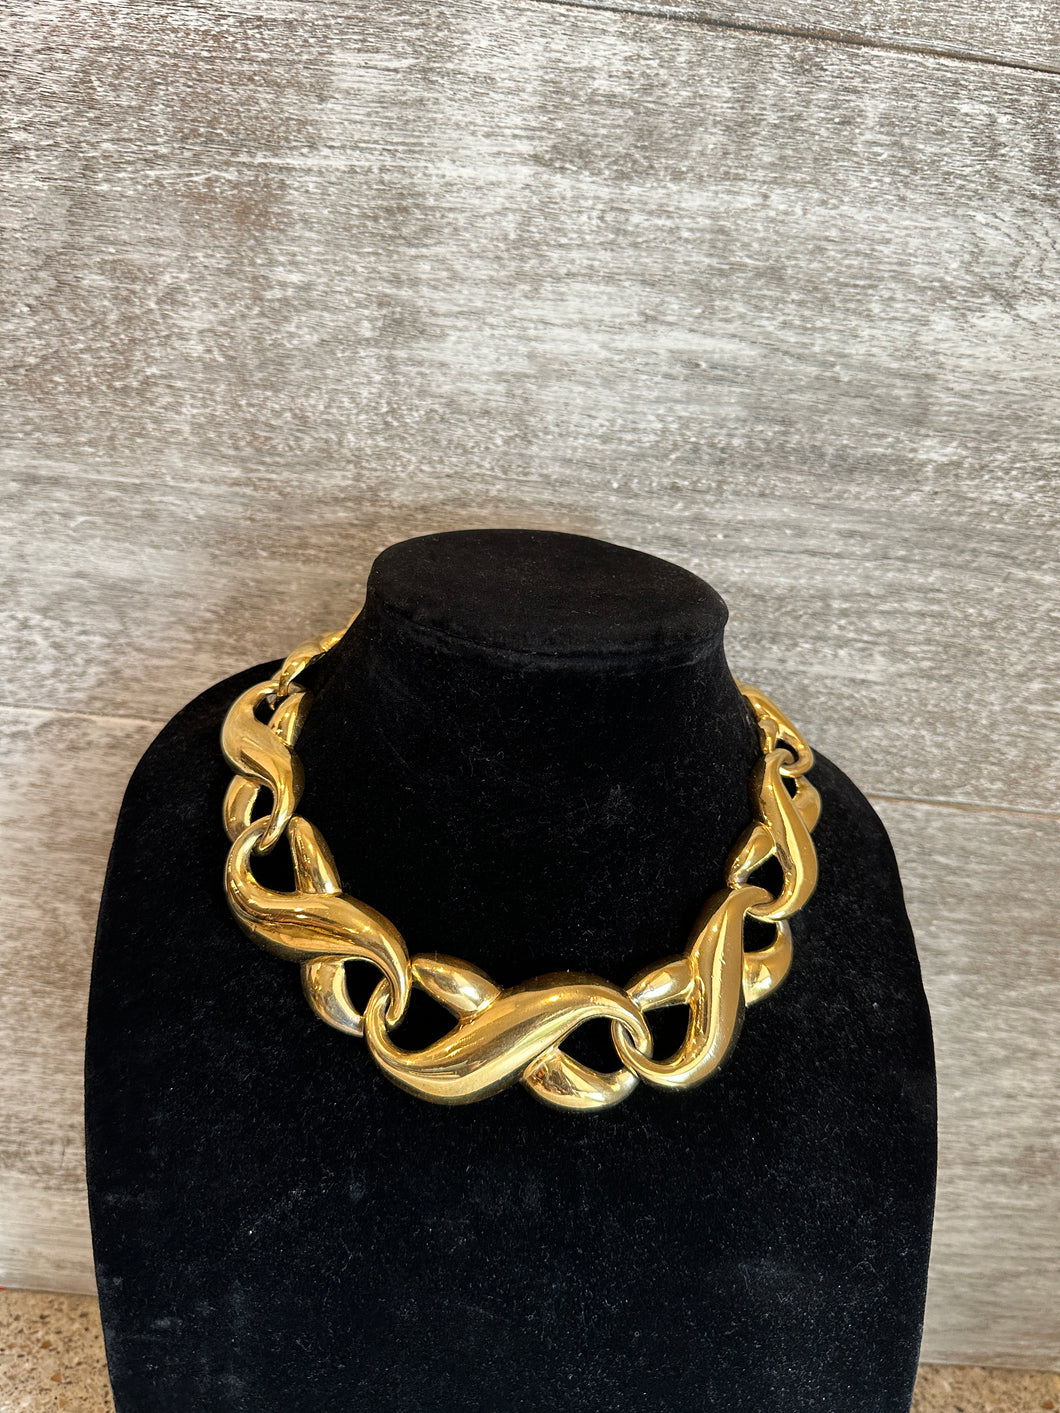 Vintage Gold Givenchy Necklace